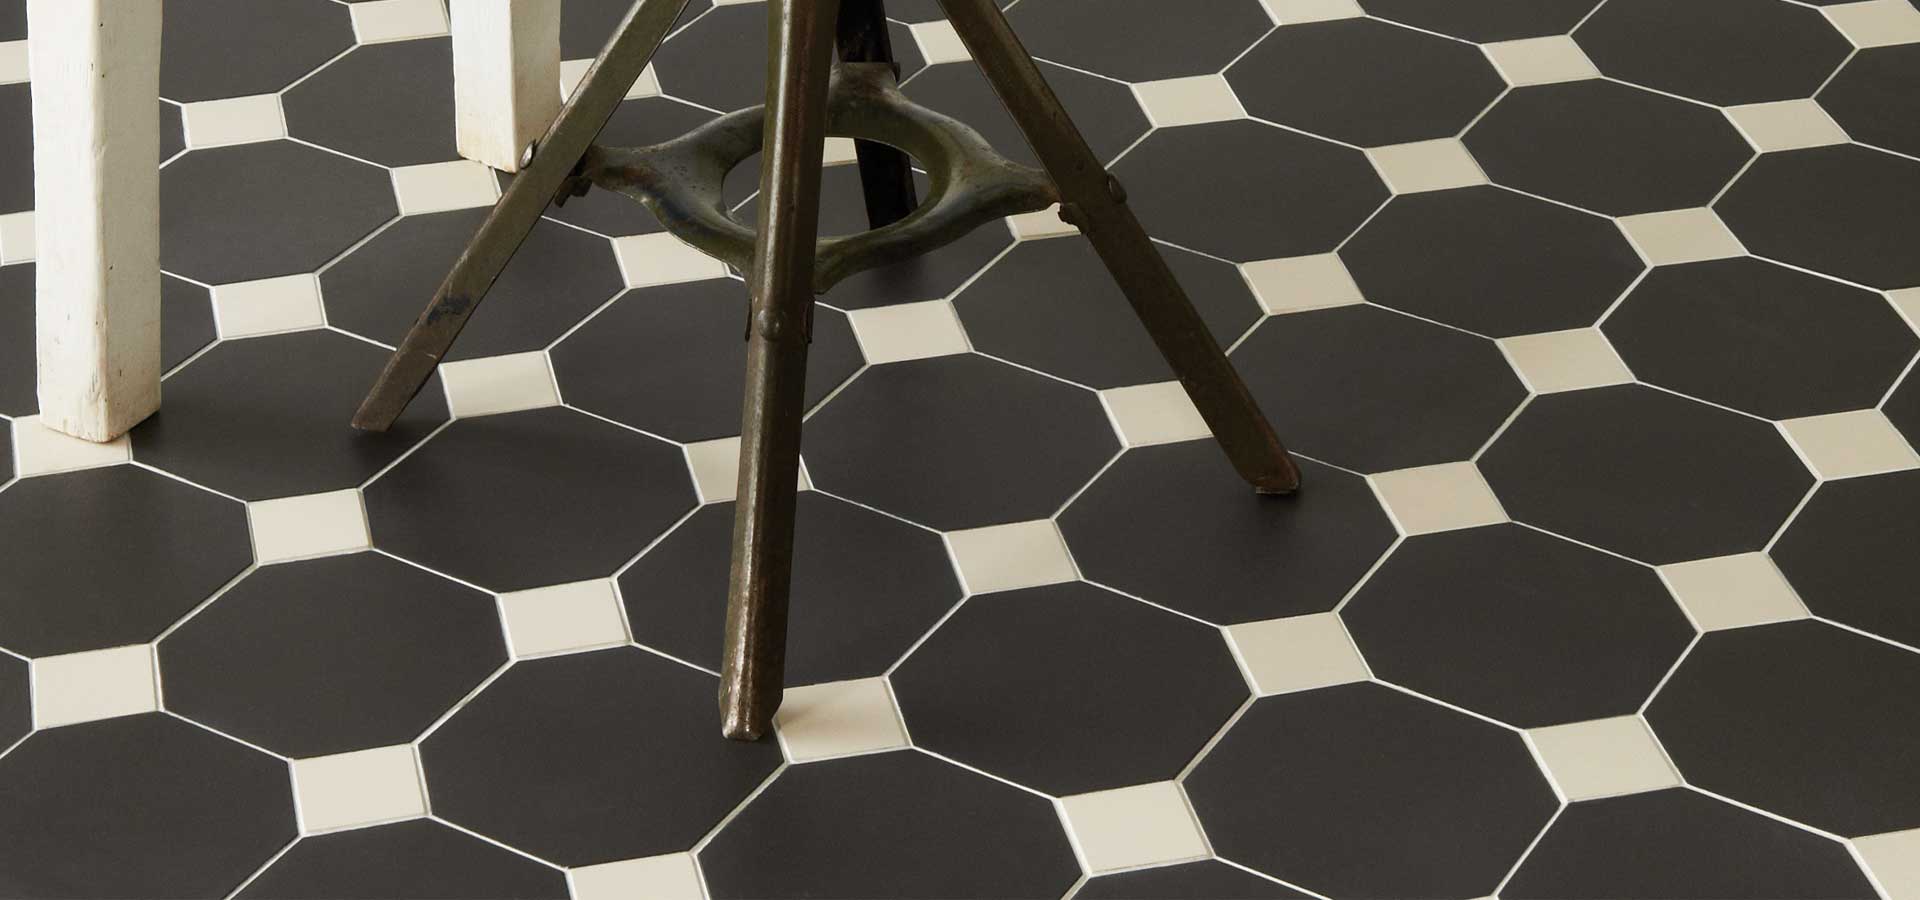 Original Style Victorian Floor Tiles - York pattern in Black and Dover White with Winchester Sloe Slider